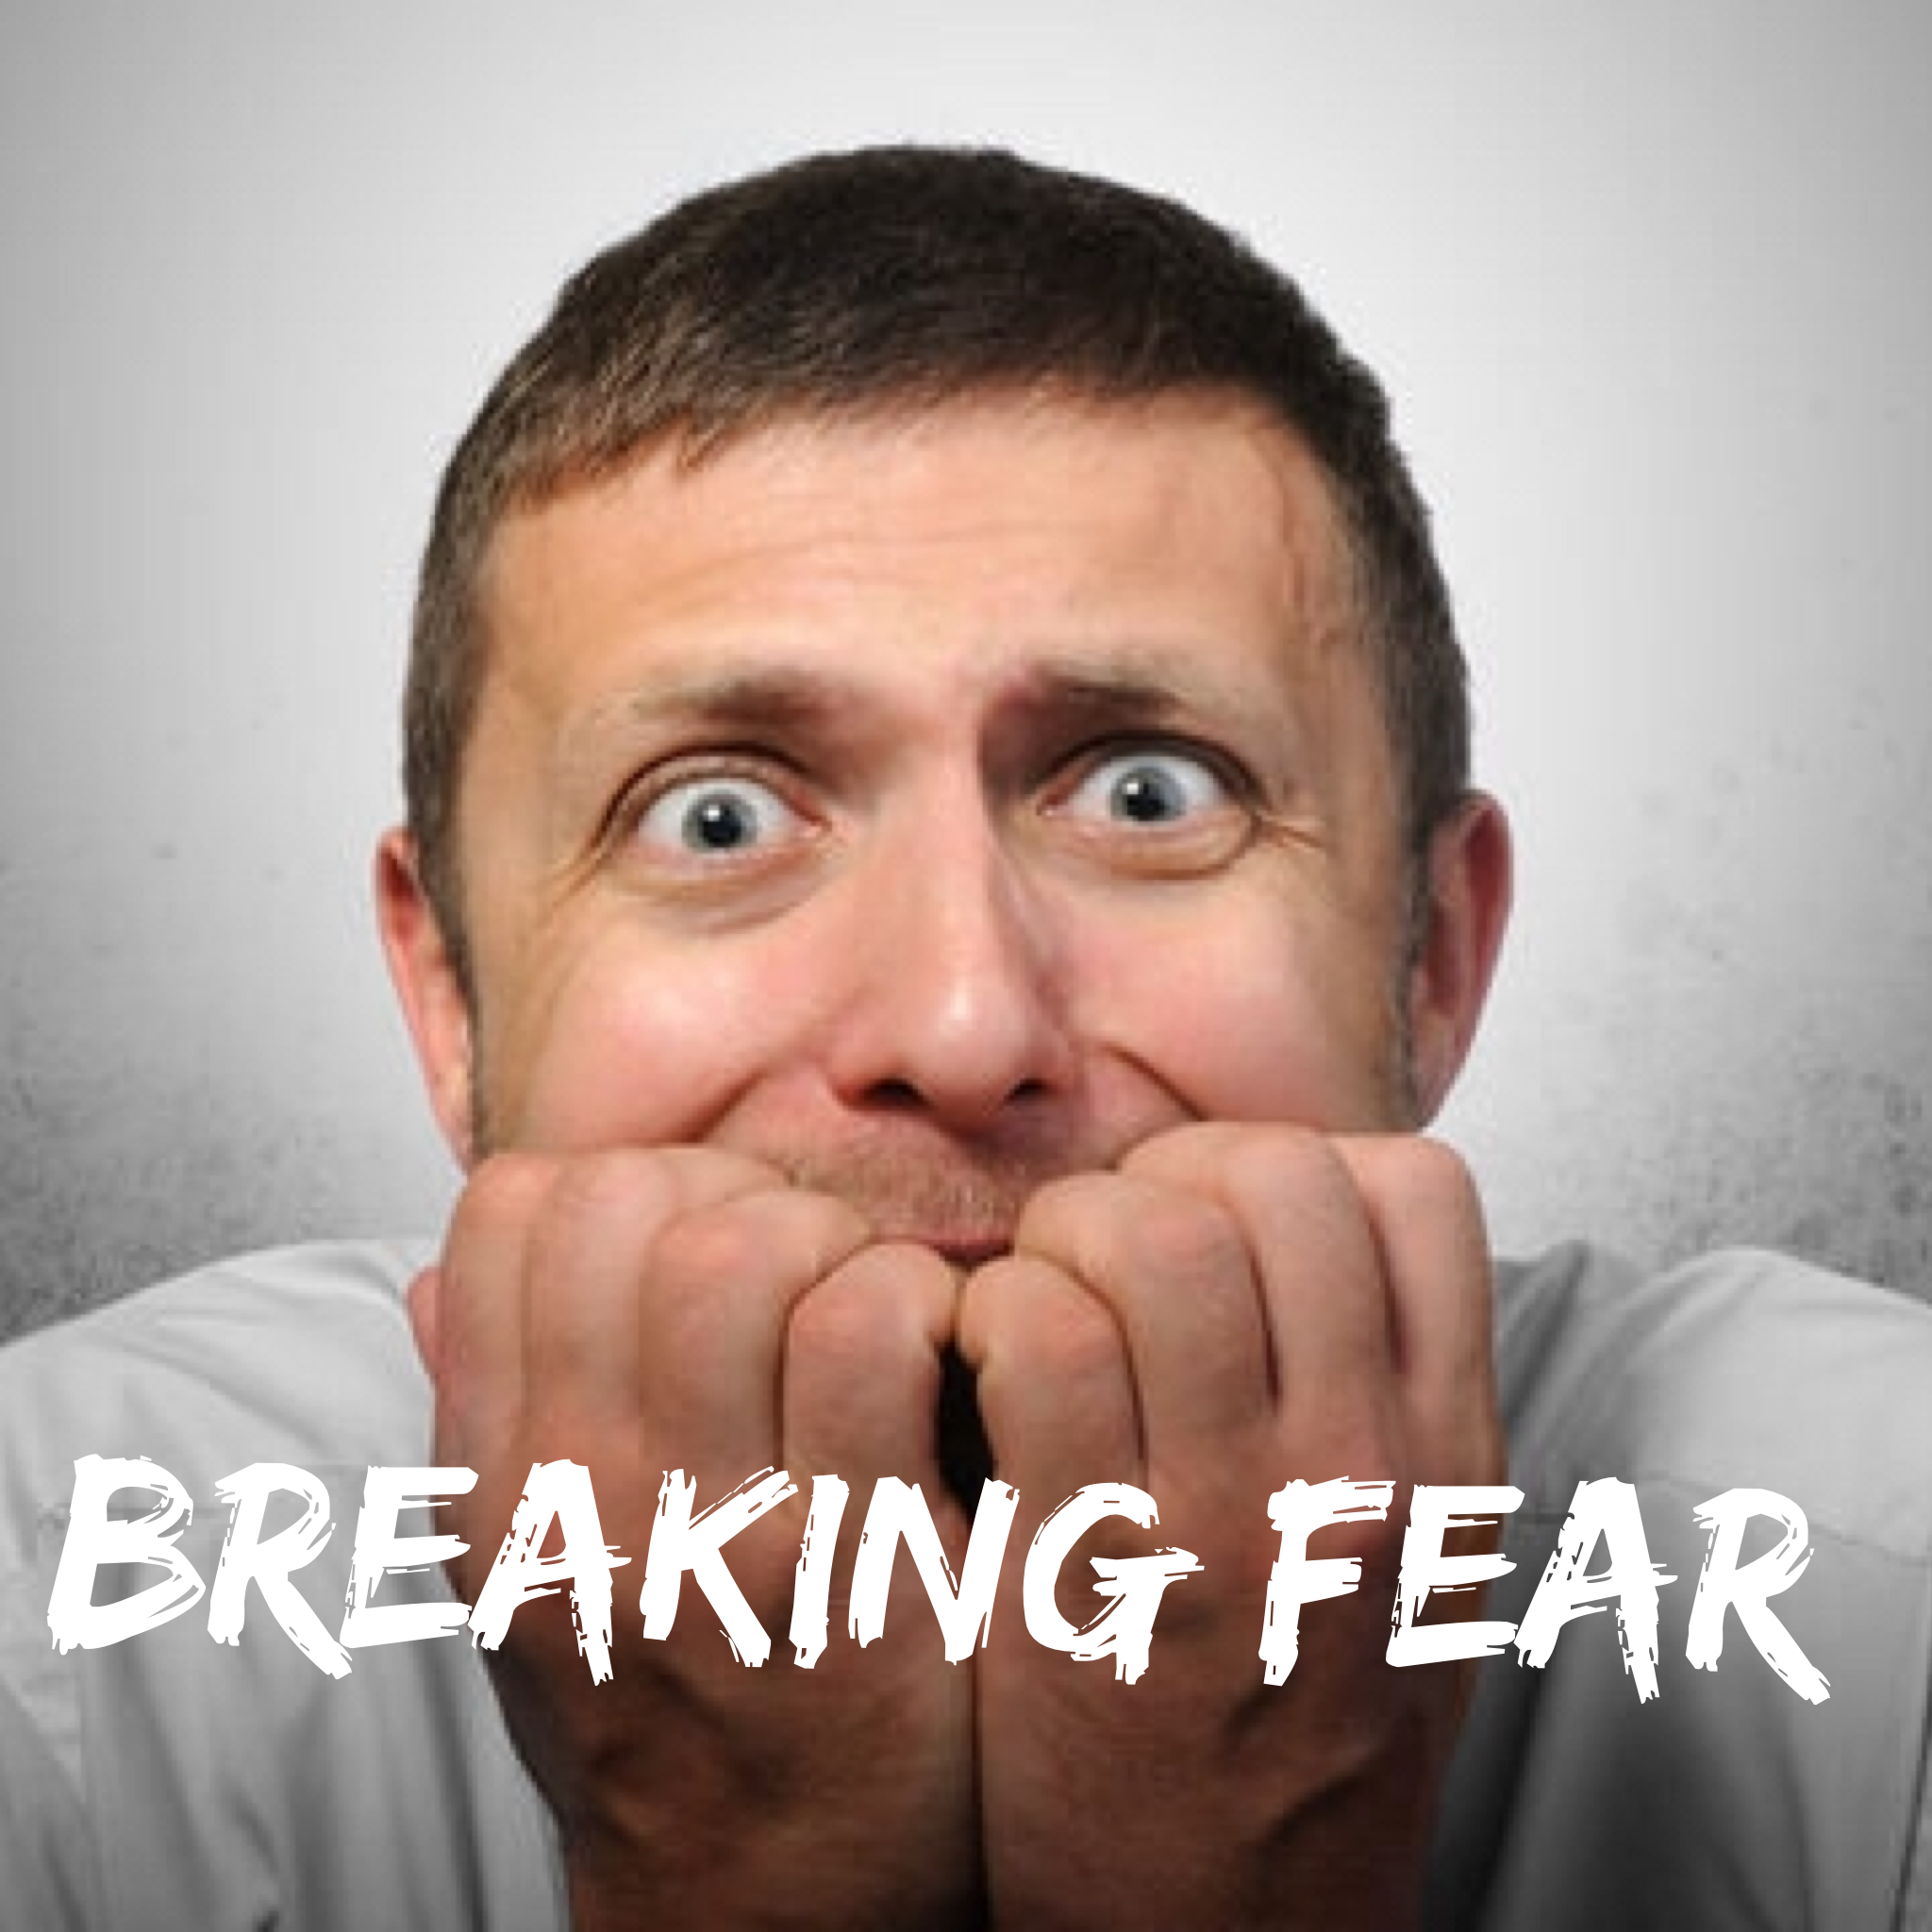 Breaking Fear: How You Can Use Fear Against Itself To Gain Courage, Take Action, and Live the Life You’ve Always Wanted